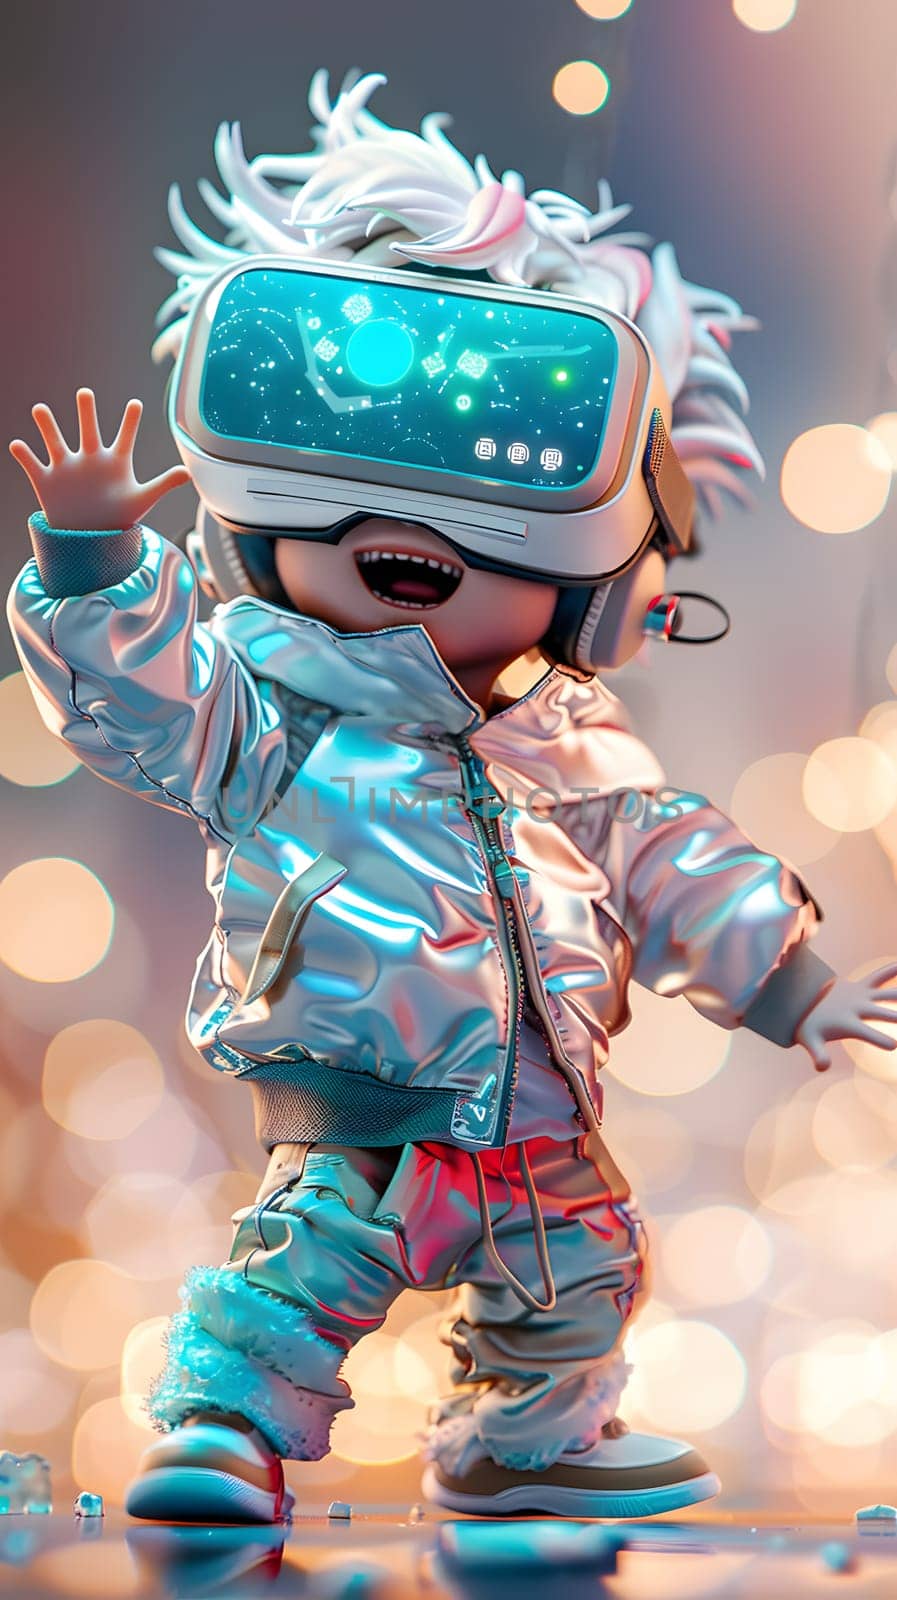 A happy toddler, wearing a pink virtual reality headset, is waving while dressed in sports gear. Personal protective equipment, such as a helmet, is essential for this event